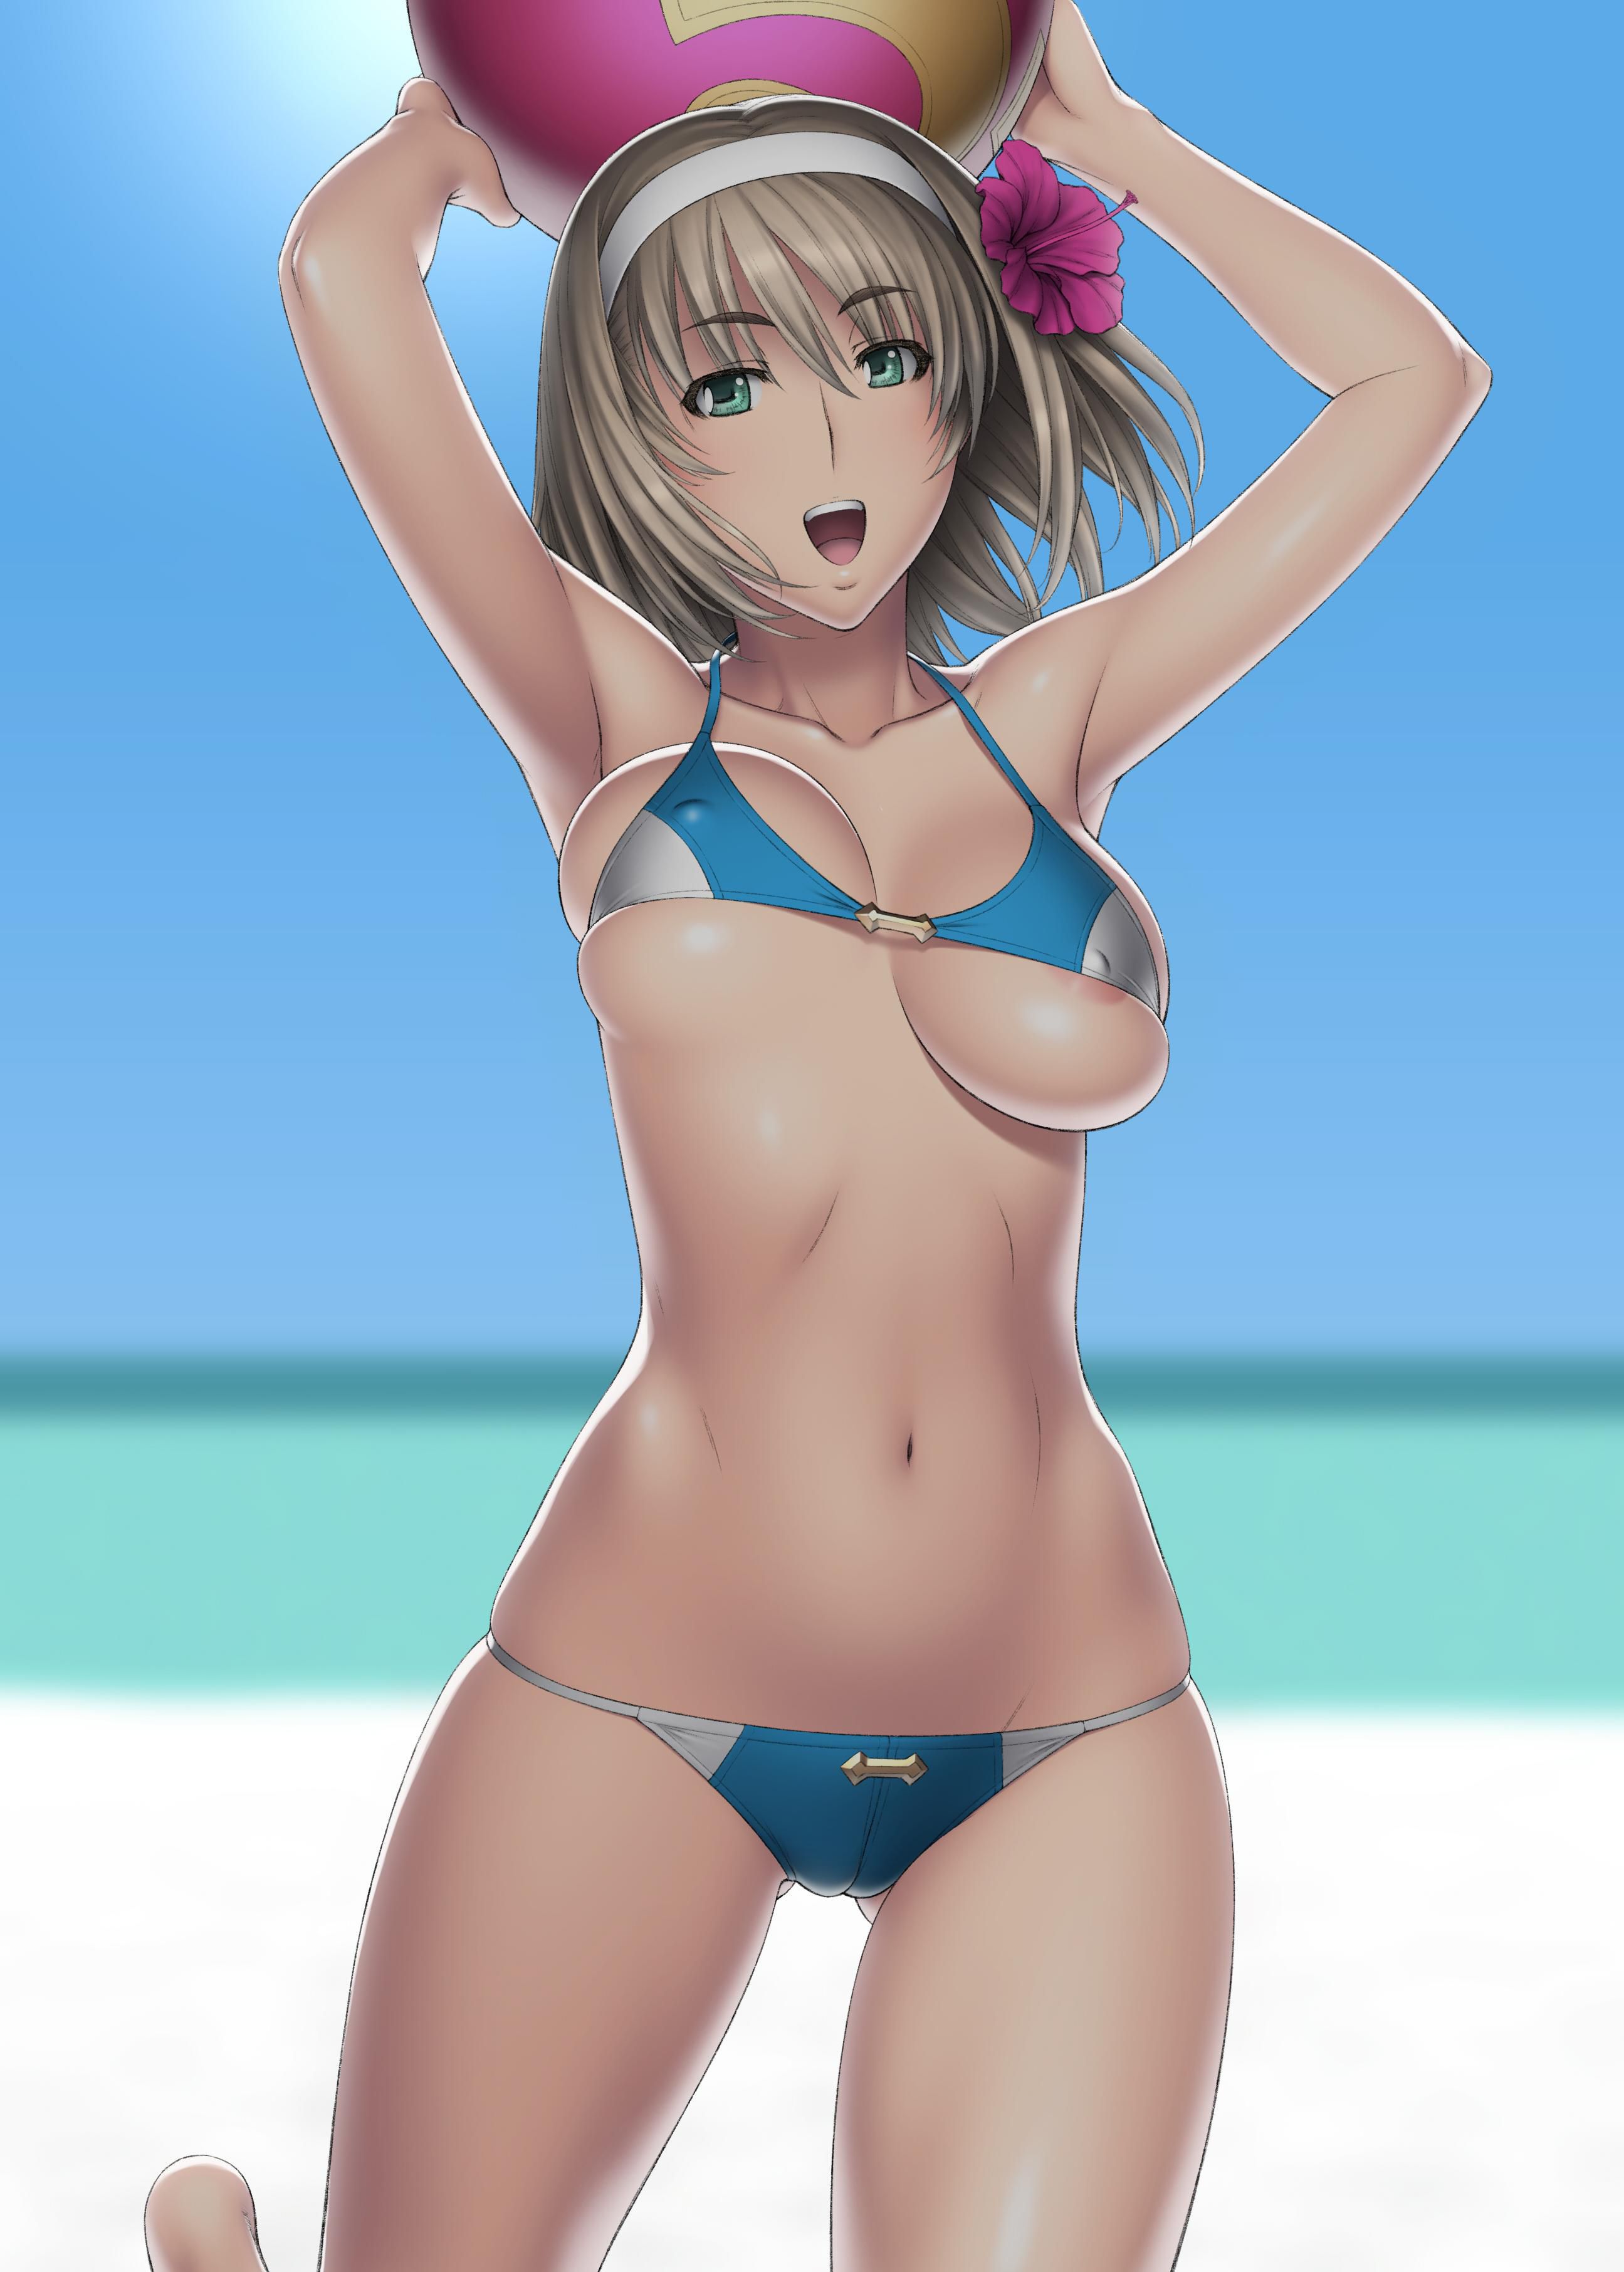 Refreshes the skin component for girl bikini pictures. Vol.10 19